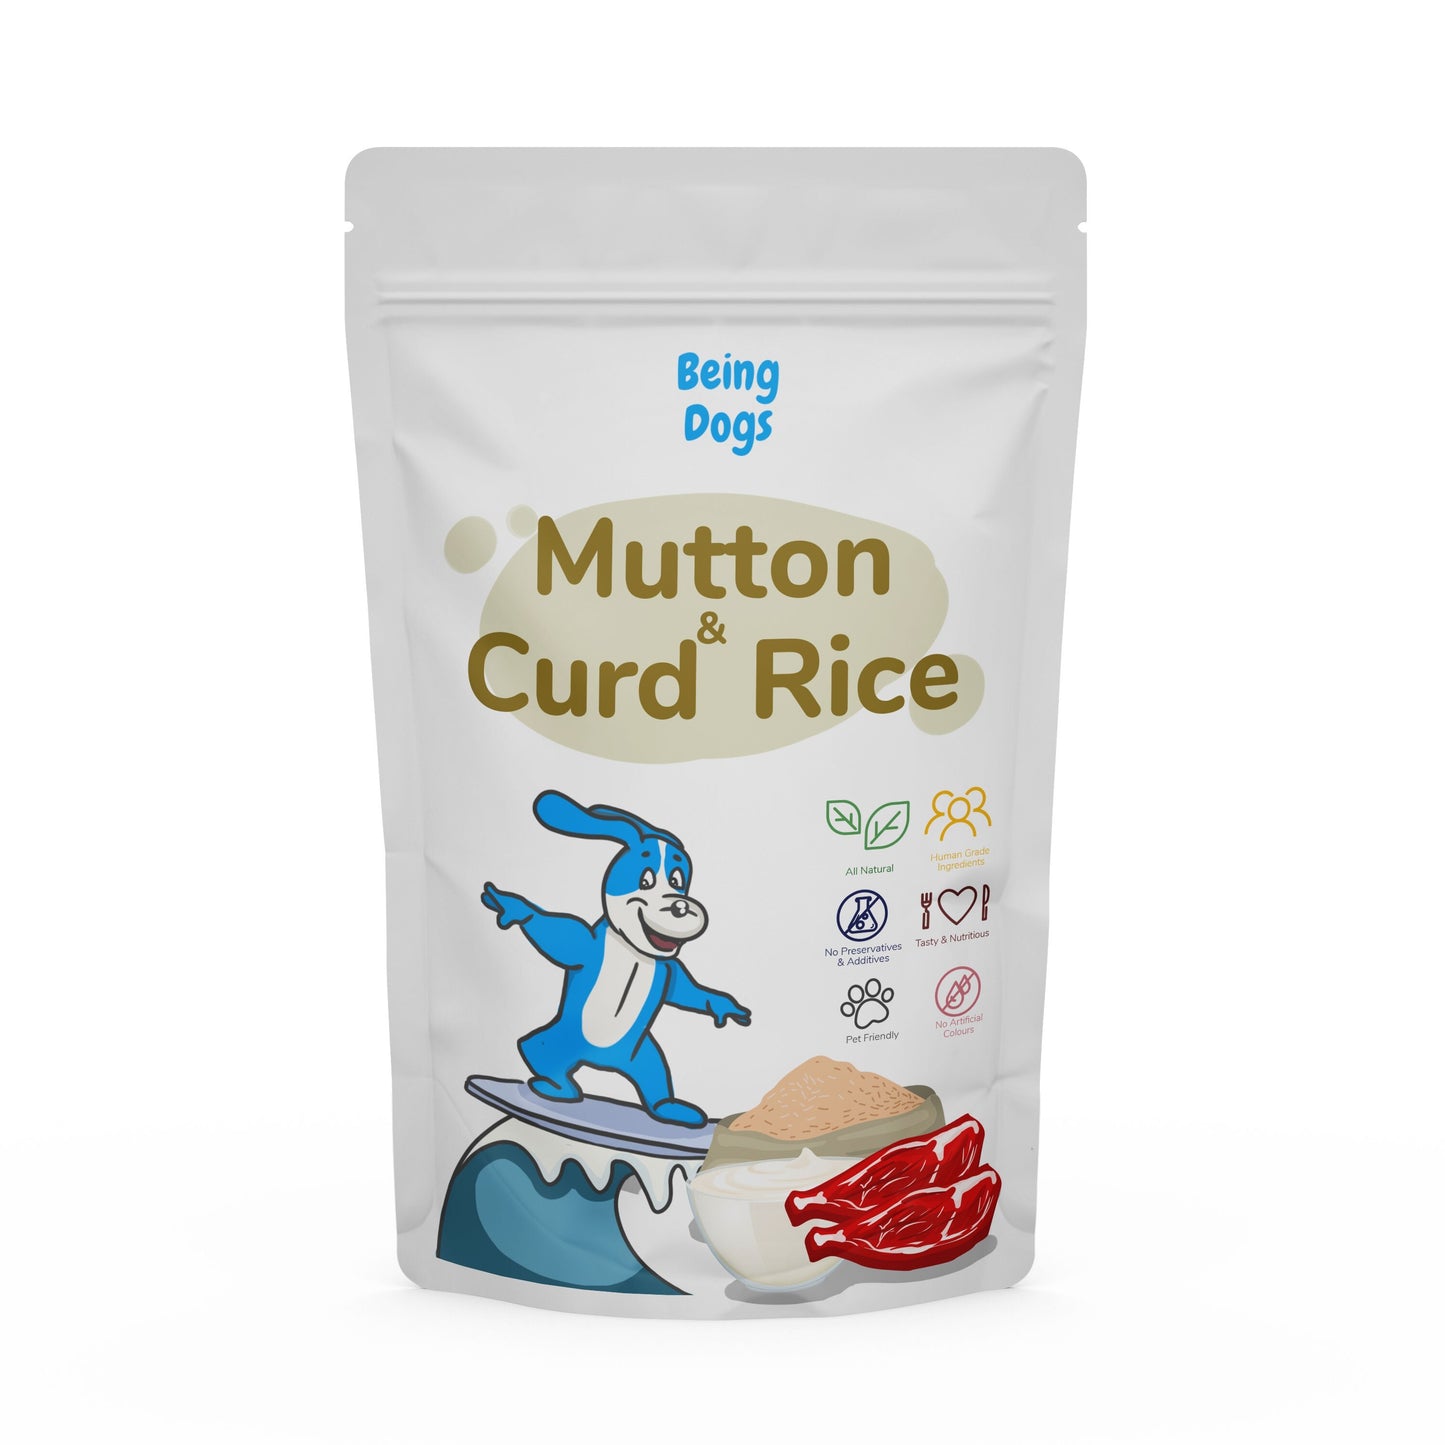 Mutton & Curd Rice Meal For Dogs (Single Packet), Customised, Made Fresh Daily, Zero Preservatives, High In Protein